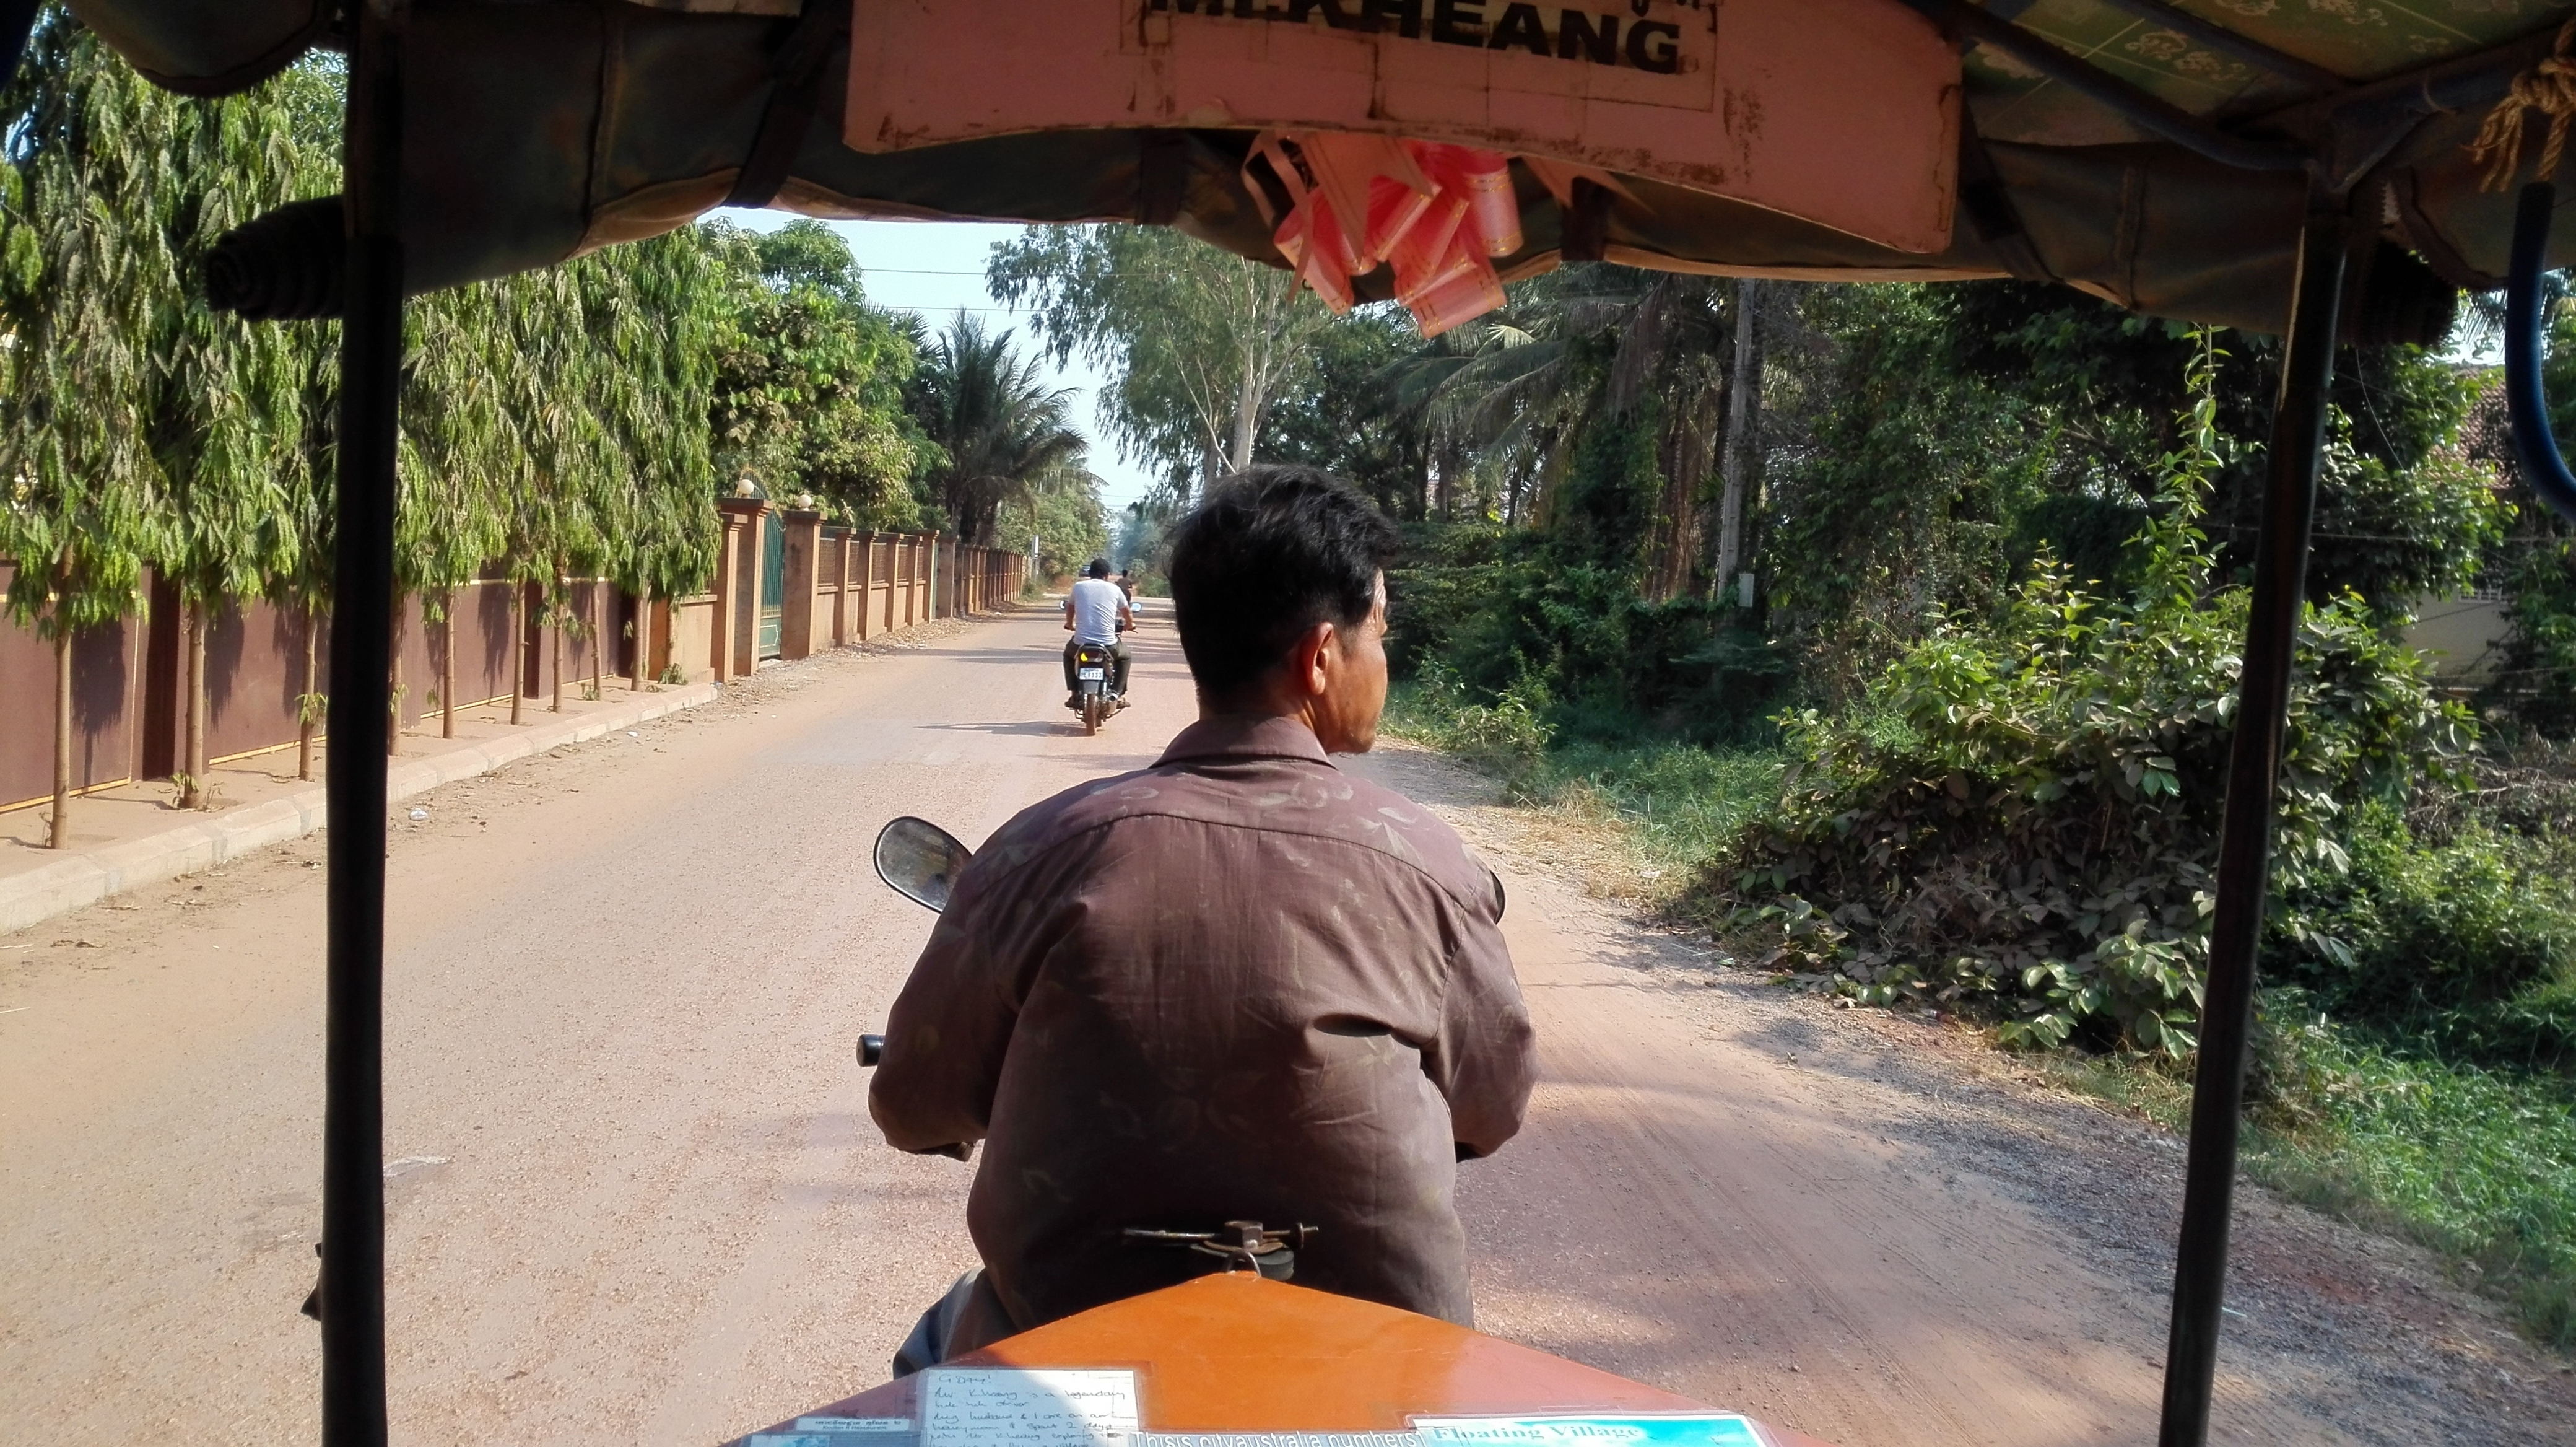 View from the back of a tuk tuk